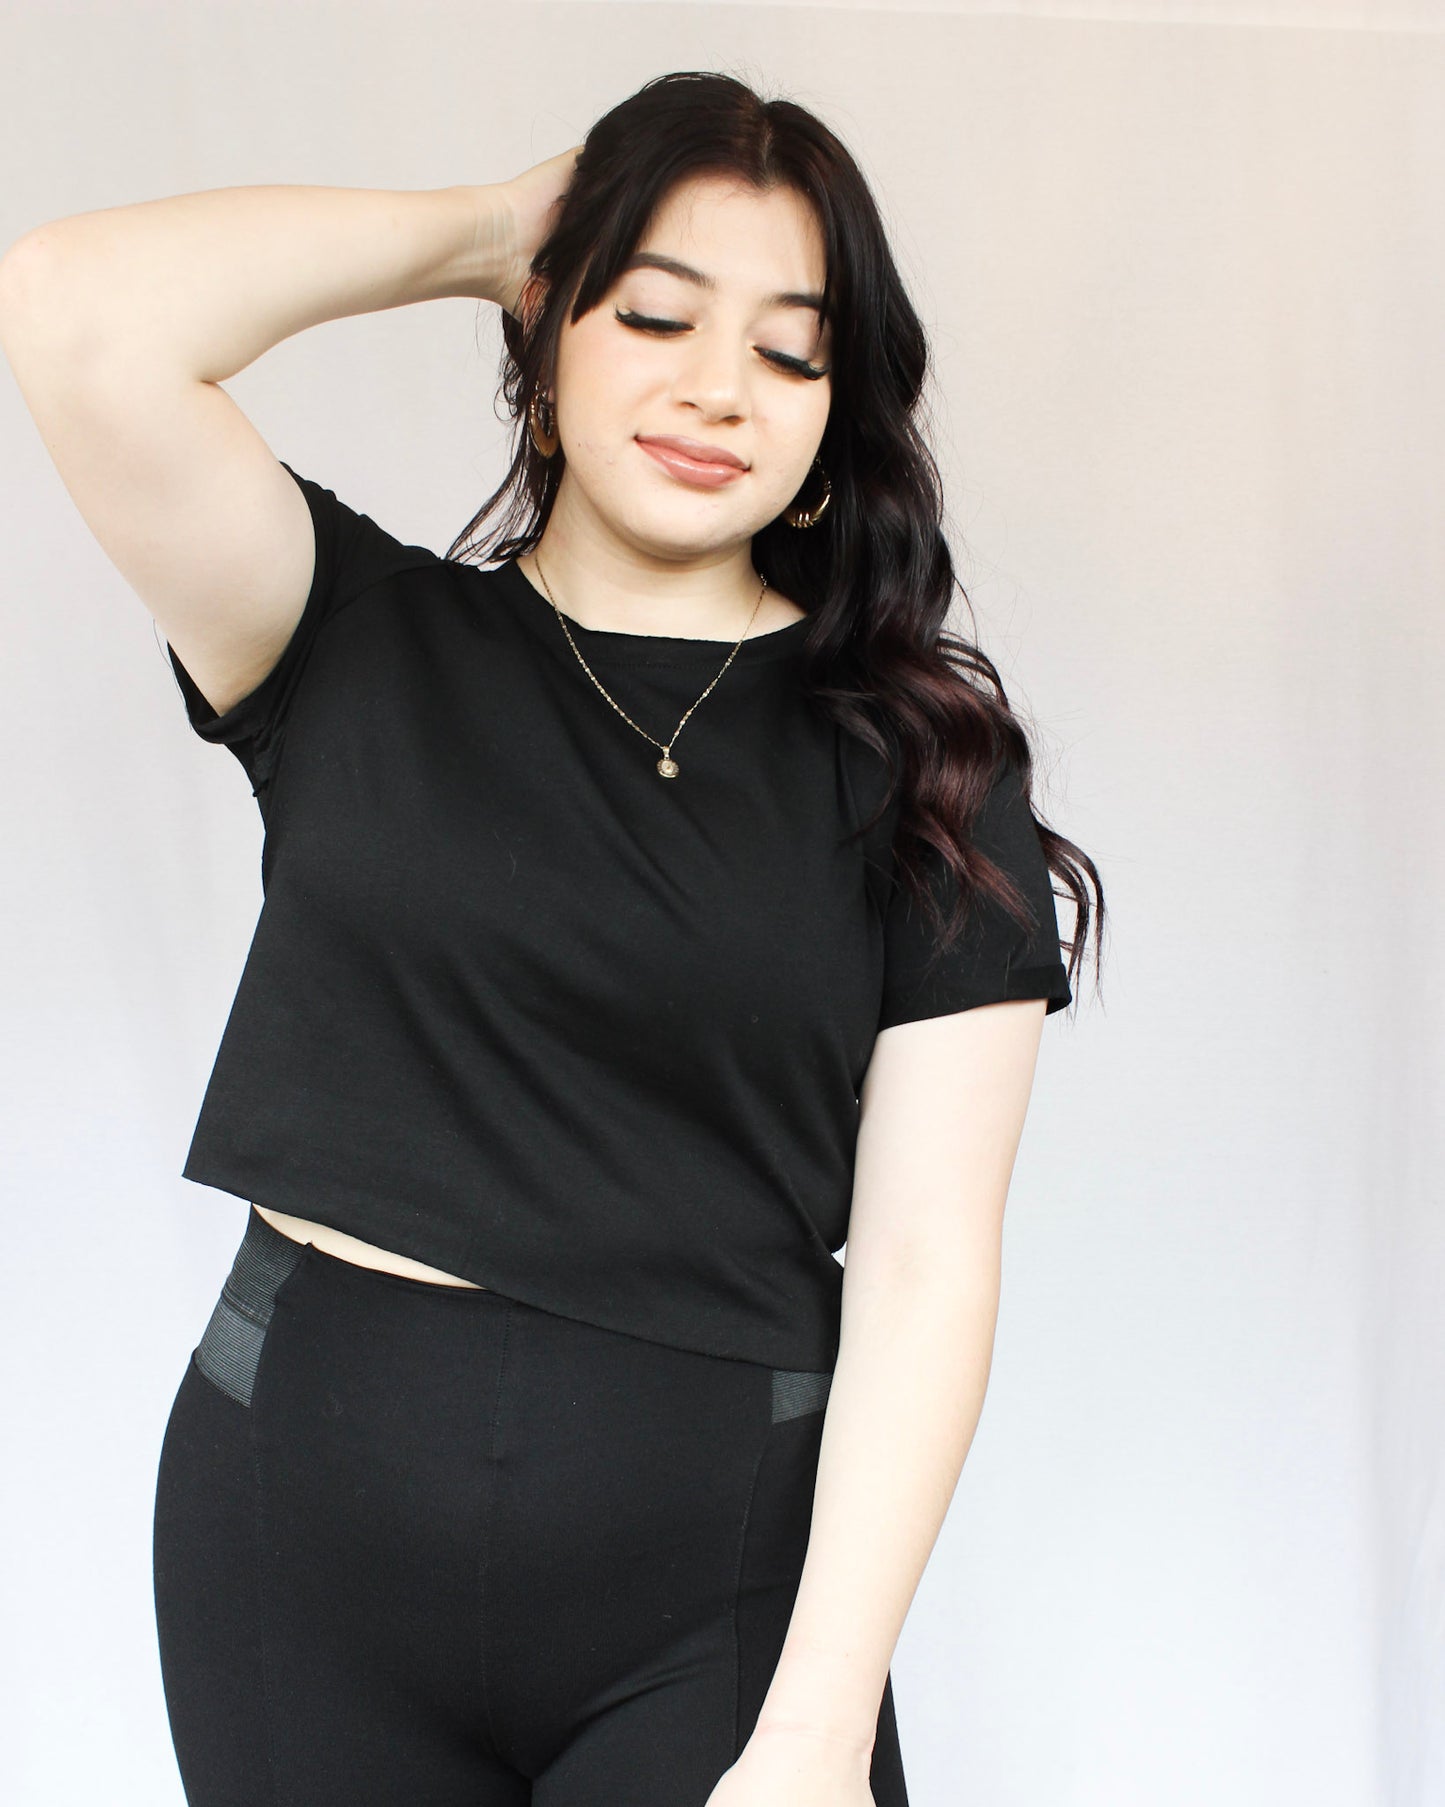 Everyday casual easy black crop top with rough hem detailing 